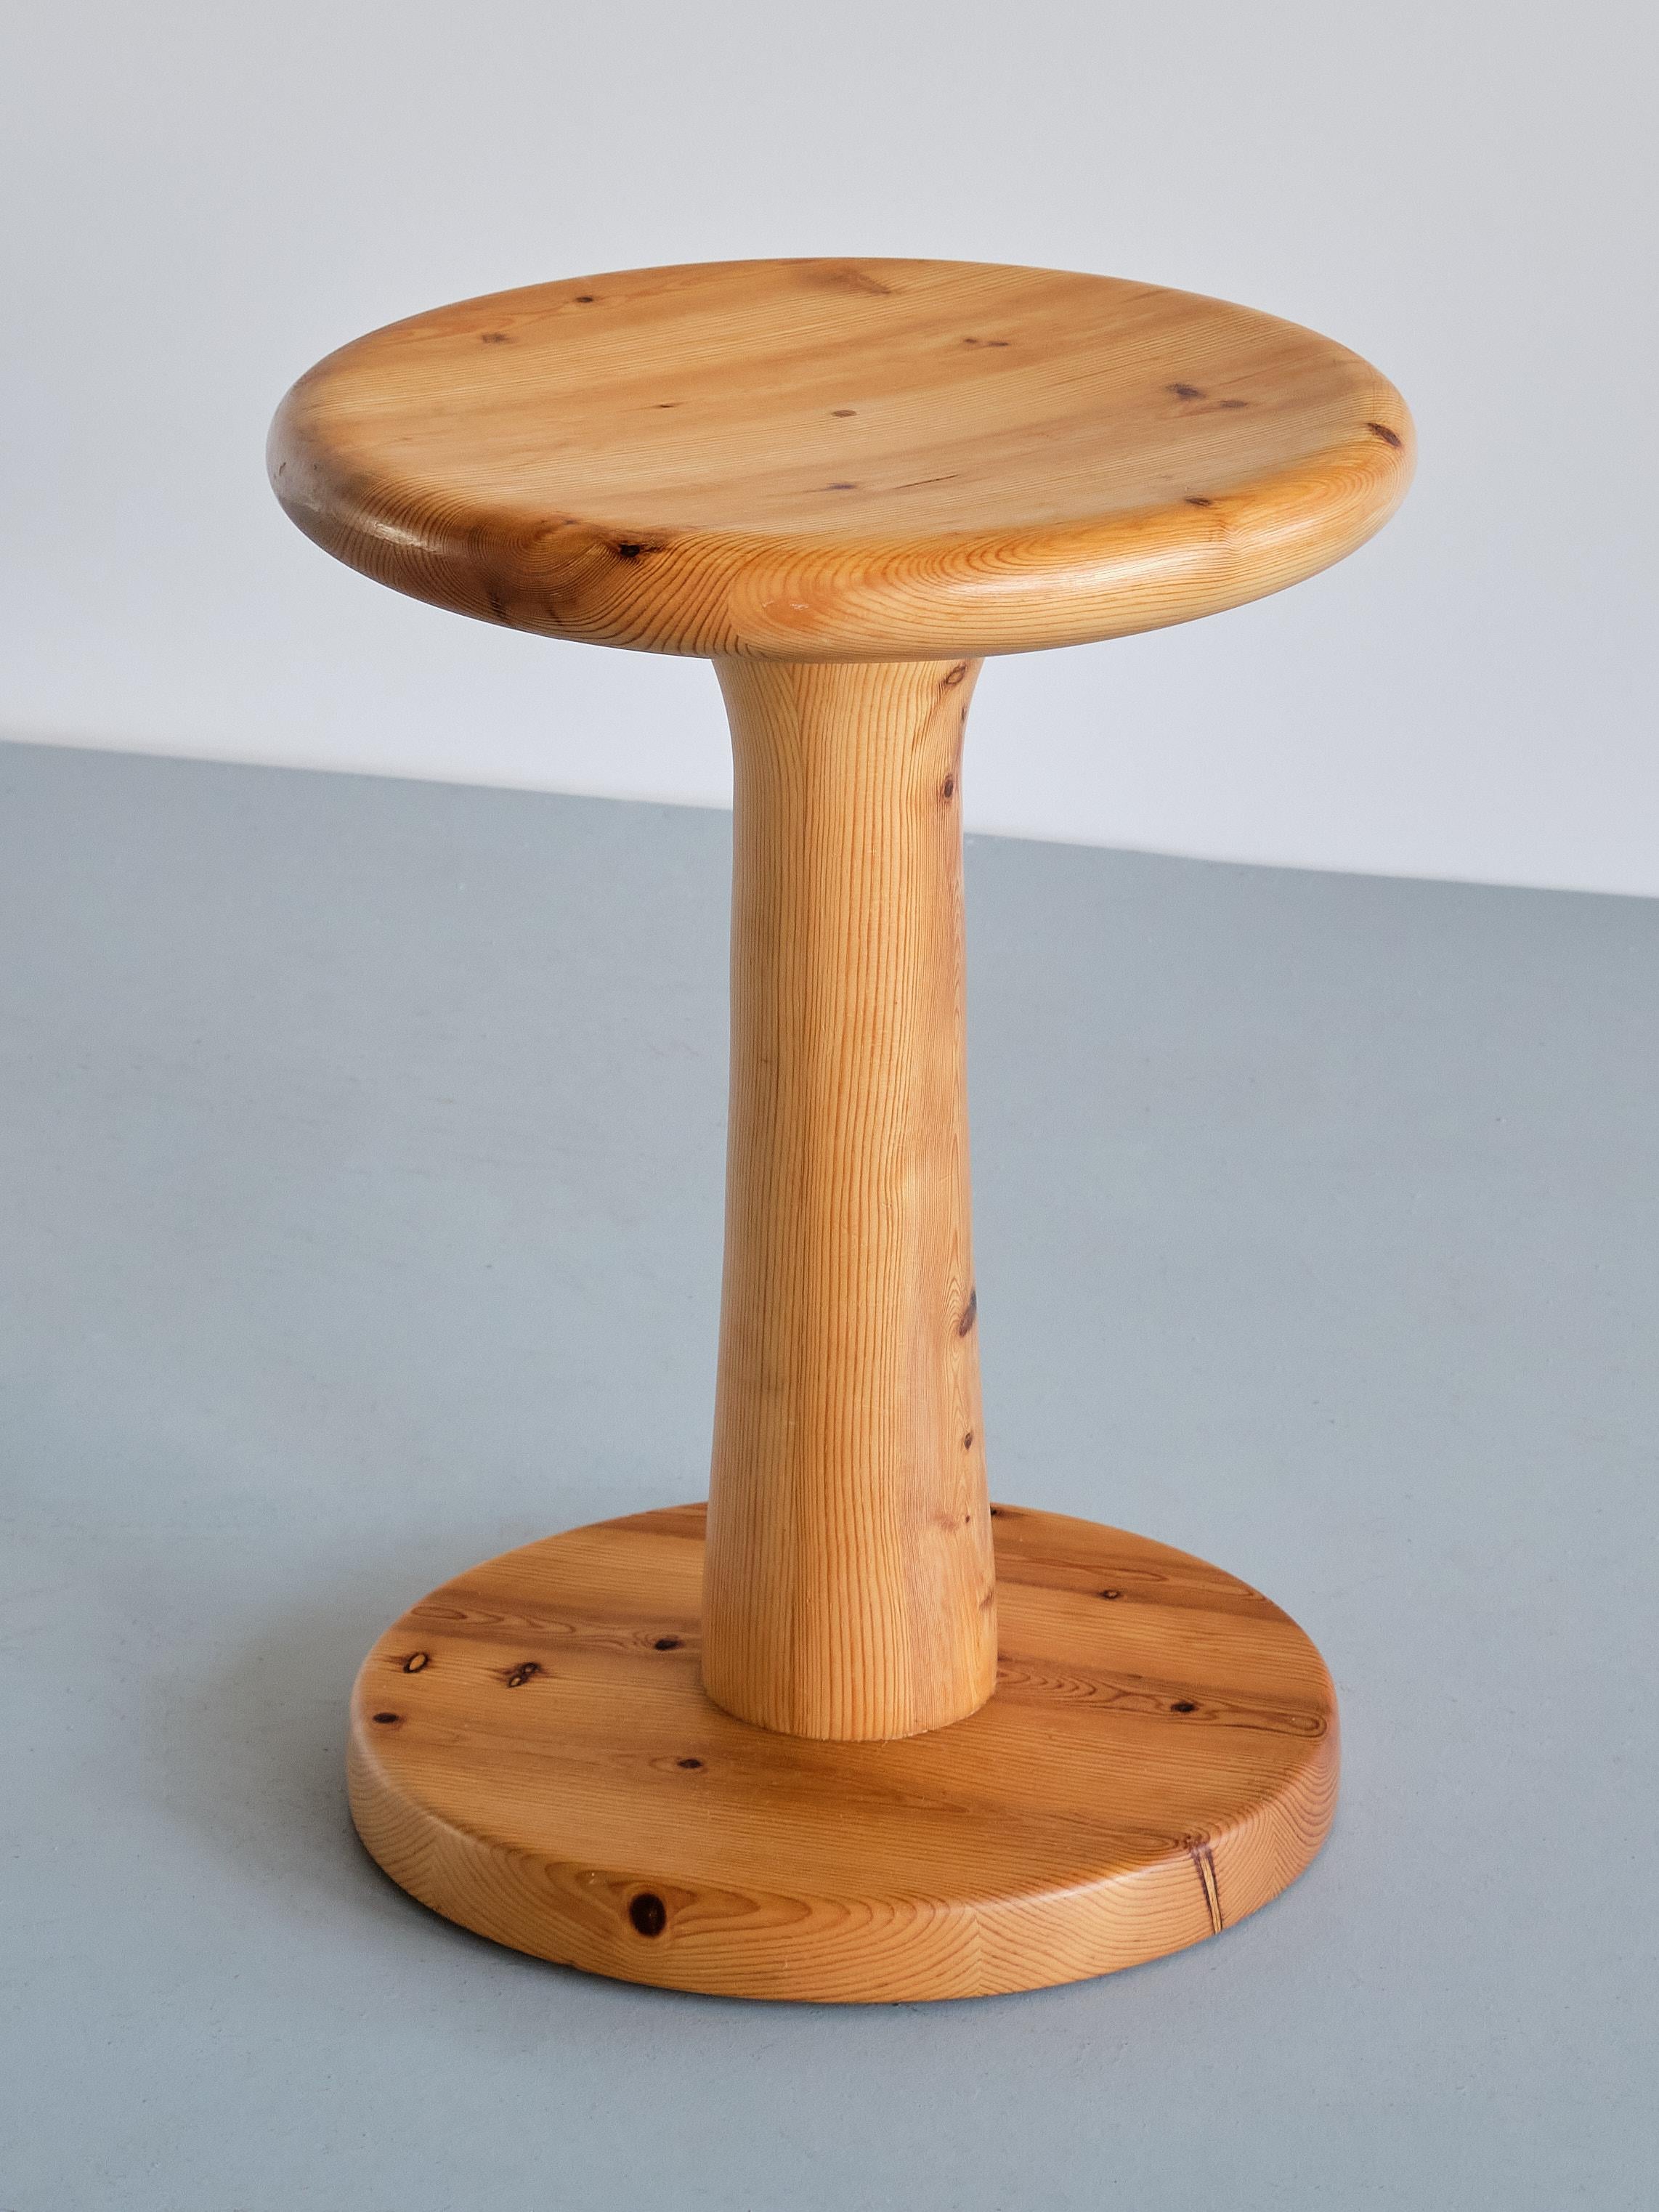 This striking stool was designed by Rainer Daumiller and produced by Hirtshals Savværk in Denmark, 1970s. The design is marked by the circular base and seat and the slightly tapered column. The stool is made of solid pine wood with a visually